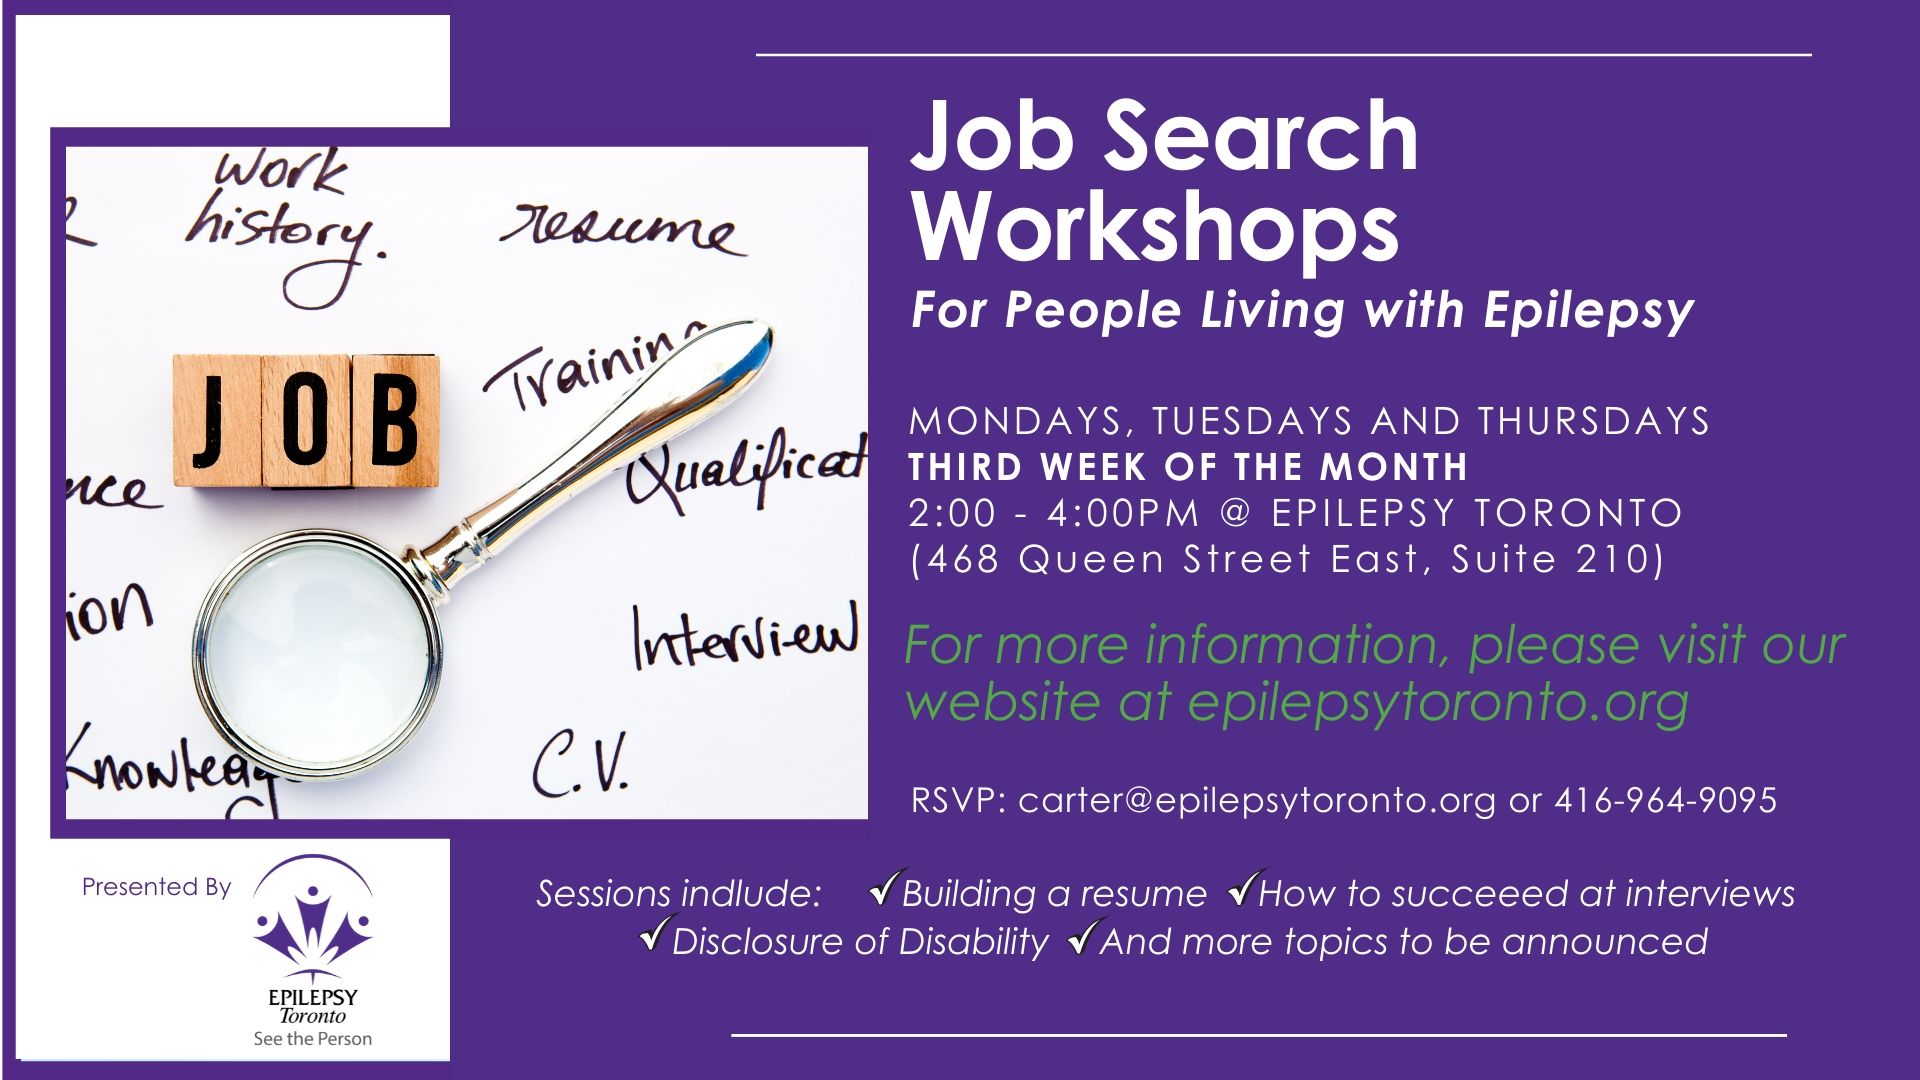 Job Search workshops for people with Epilepsy